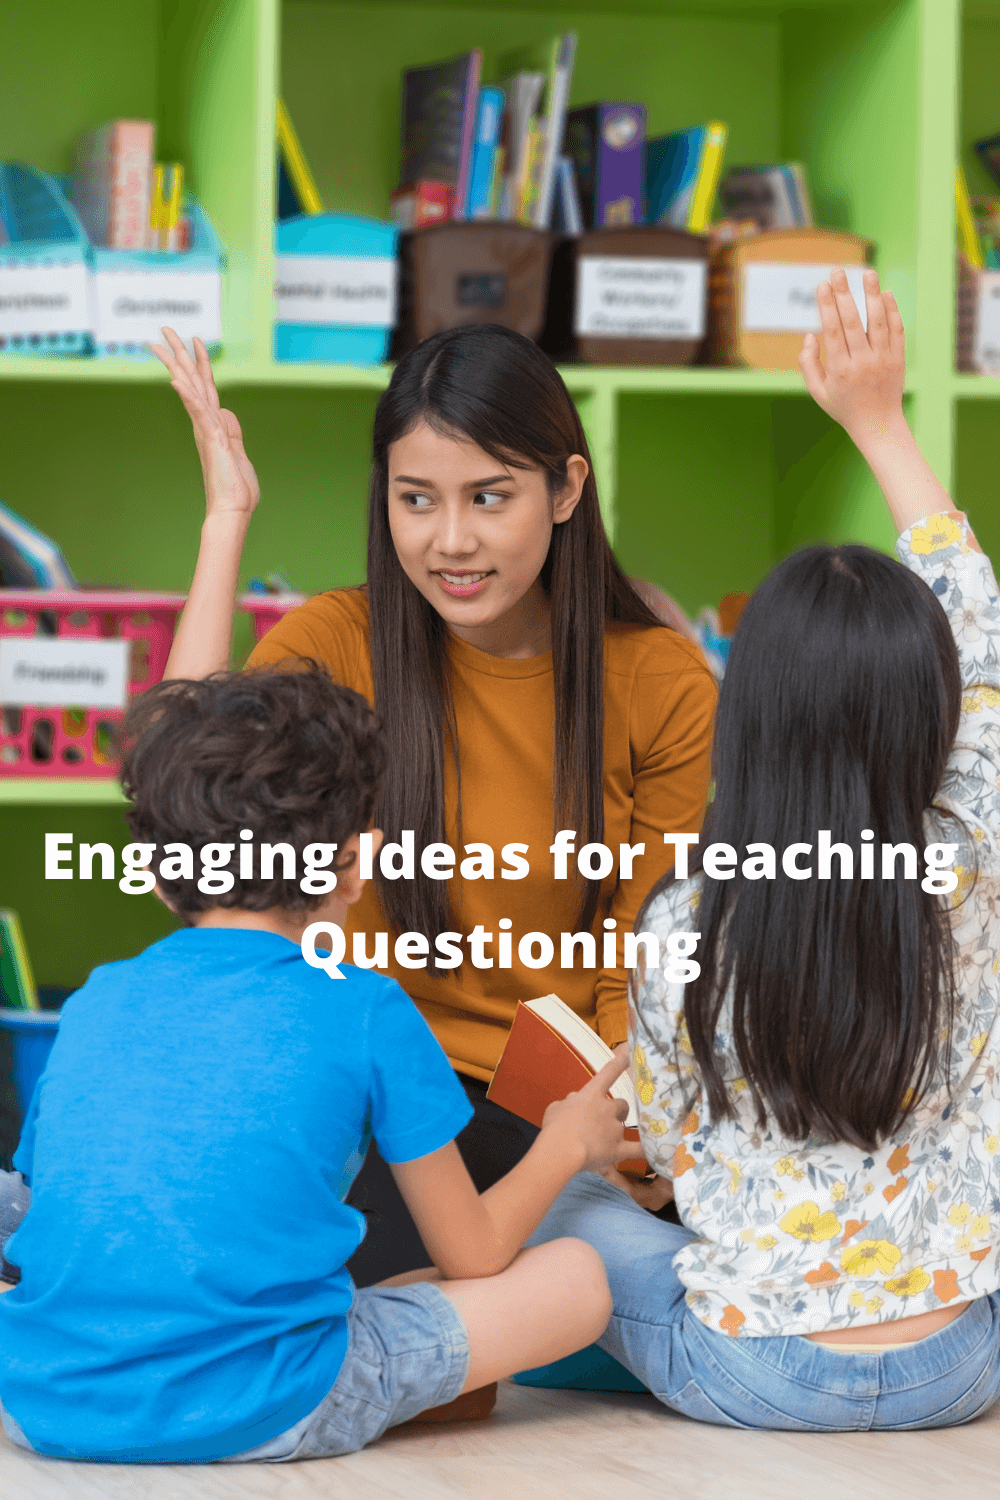 teacher asking questions with students with text that says Engaging Ideas for Teaching Questioning